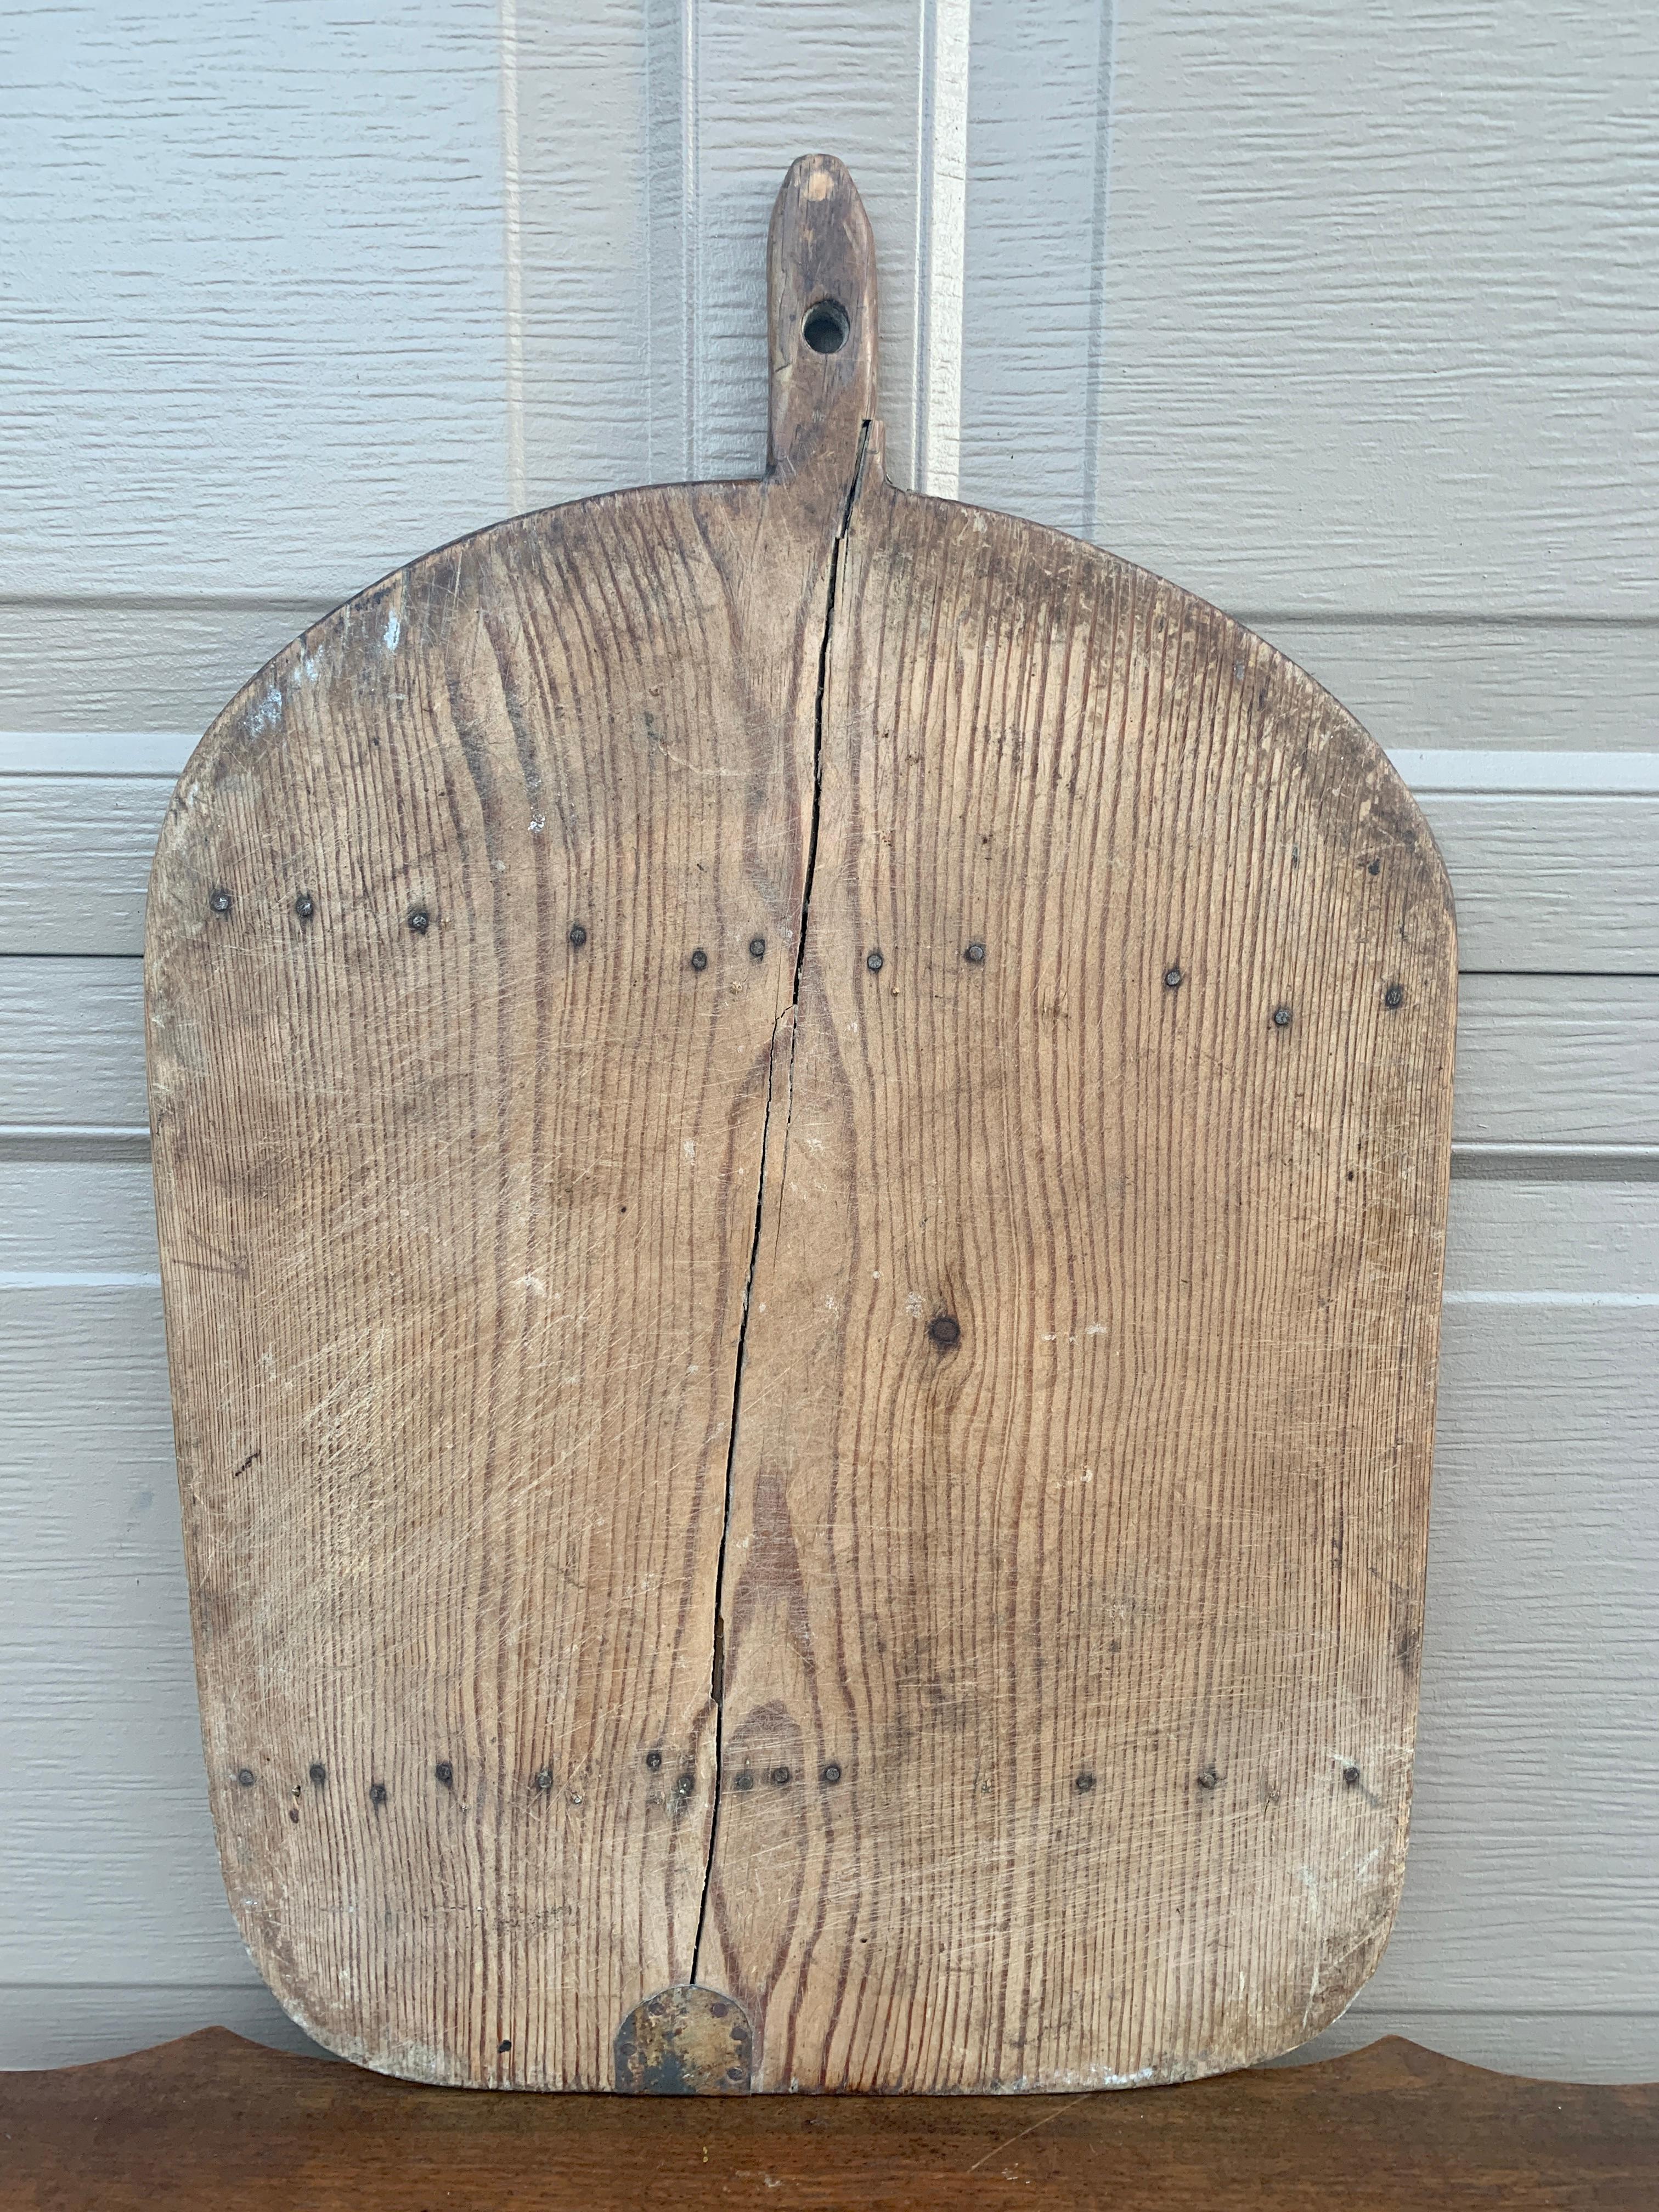 A beautiful antique French hand-made bread board that would add character and charm to any space. This piece could be used as wall decor or is ready to serve as a cutting board or serving board for bread, cheese, or charcuterie. 

France, Late 19th